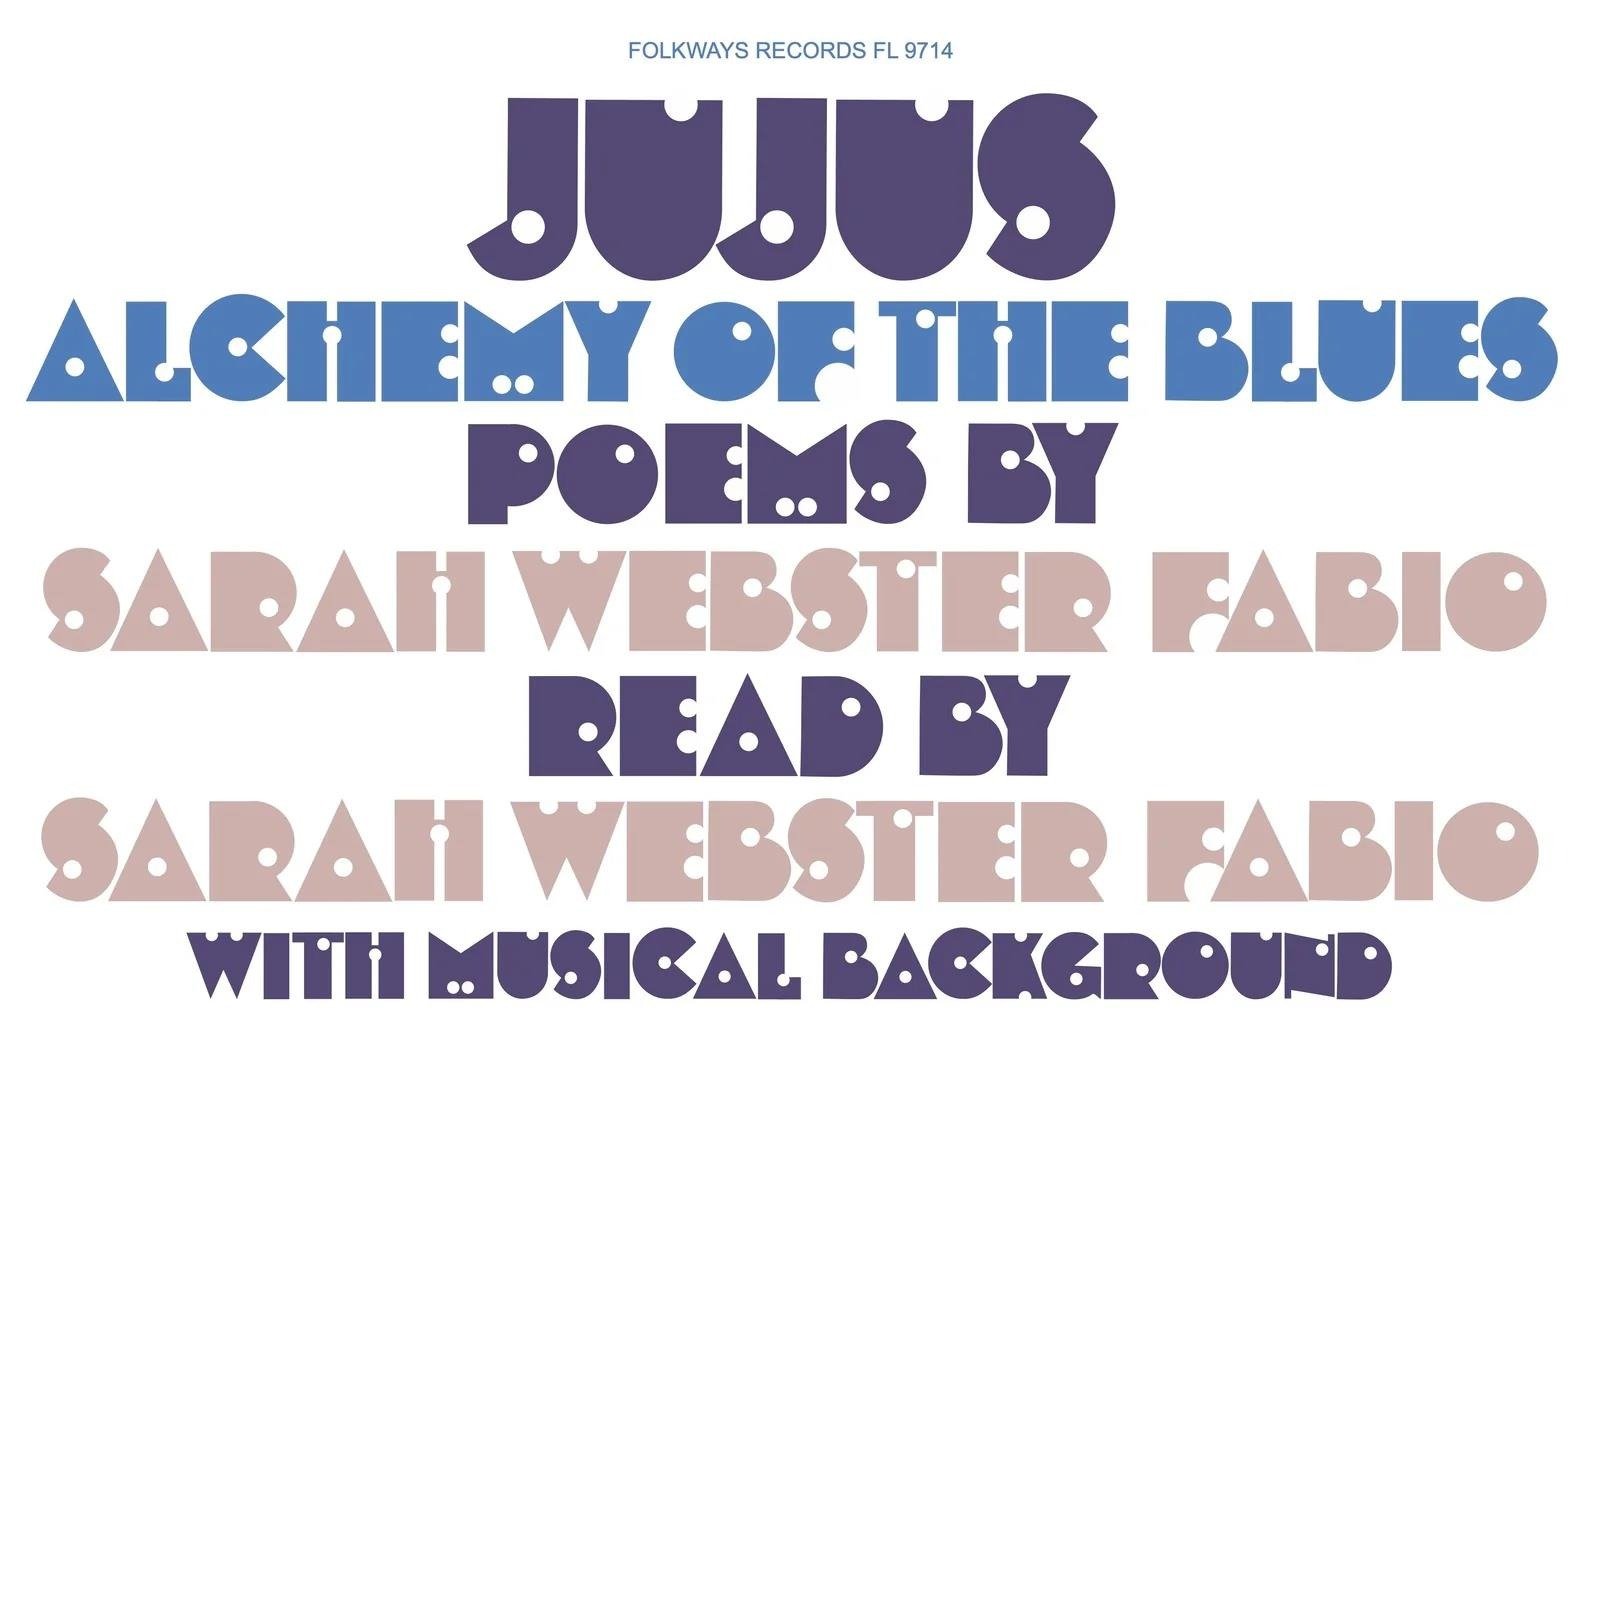 CD Shop - WEBSTER FABIO, SARAH JUJUS/ALCHEMY OF THE BLUES: POEMS BY SARAH WEBSTER